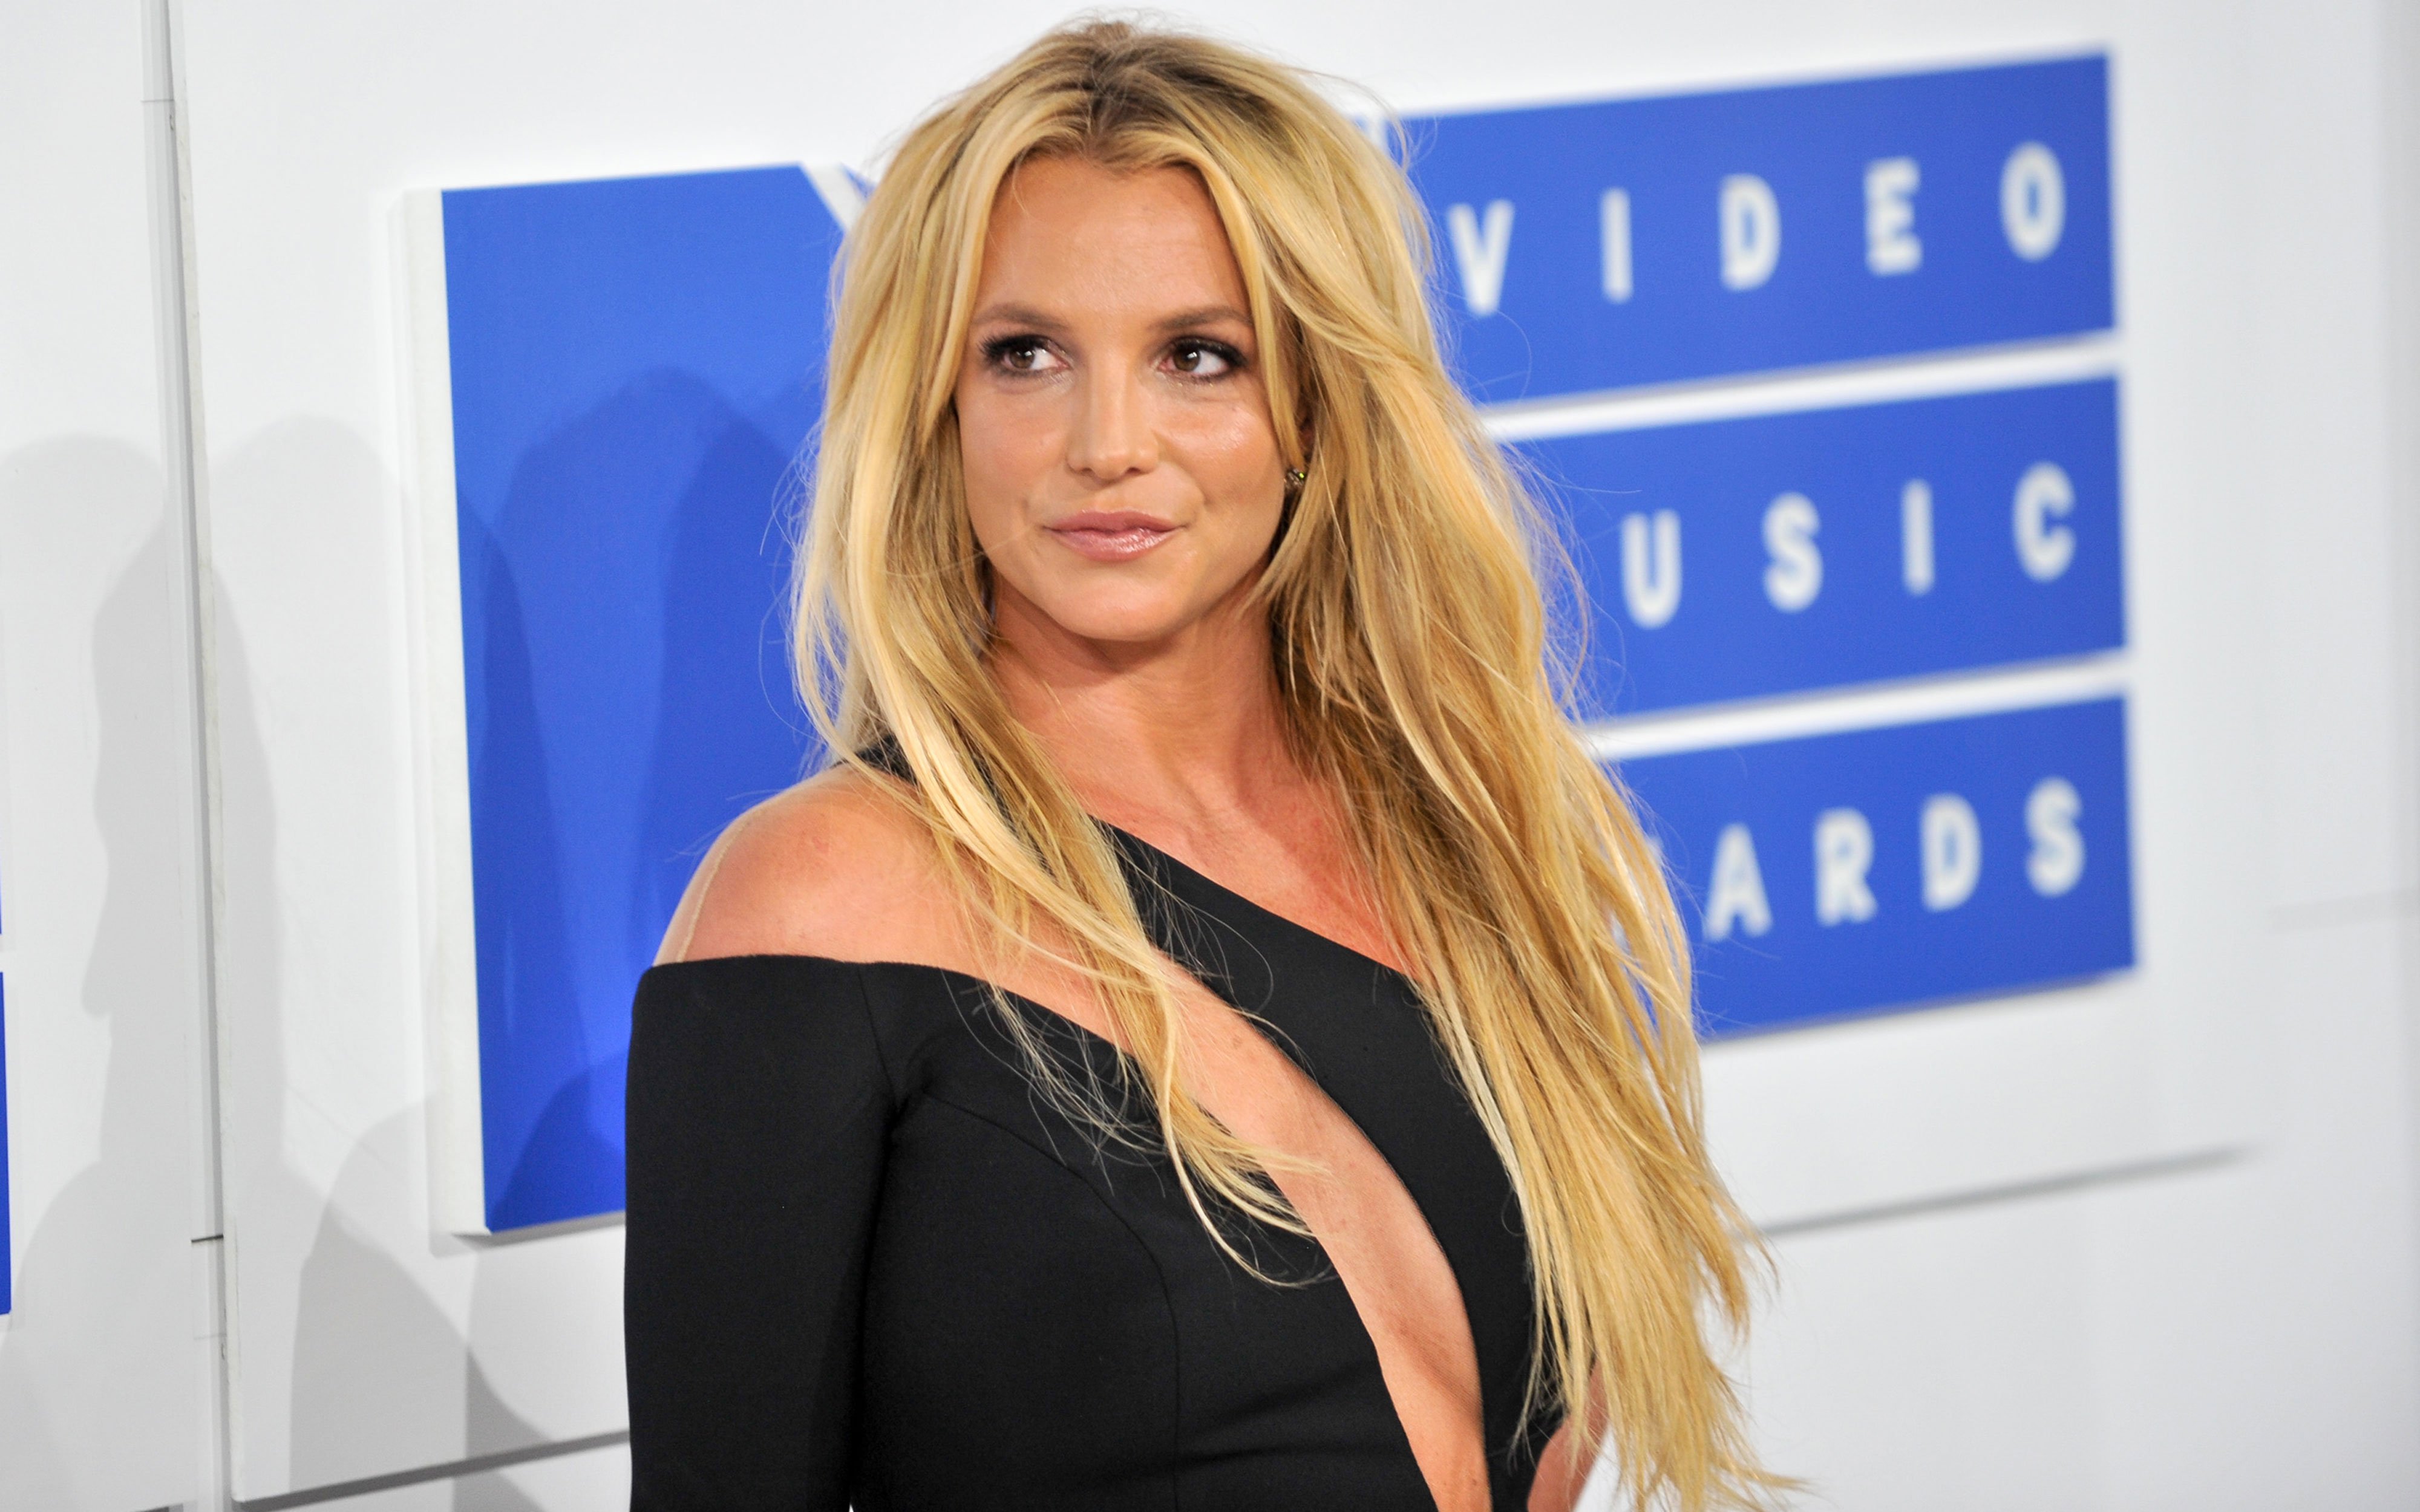 Britney Spears Is Expected To Speak Out in Court About Her Conservatorship